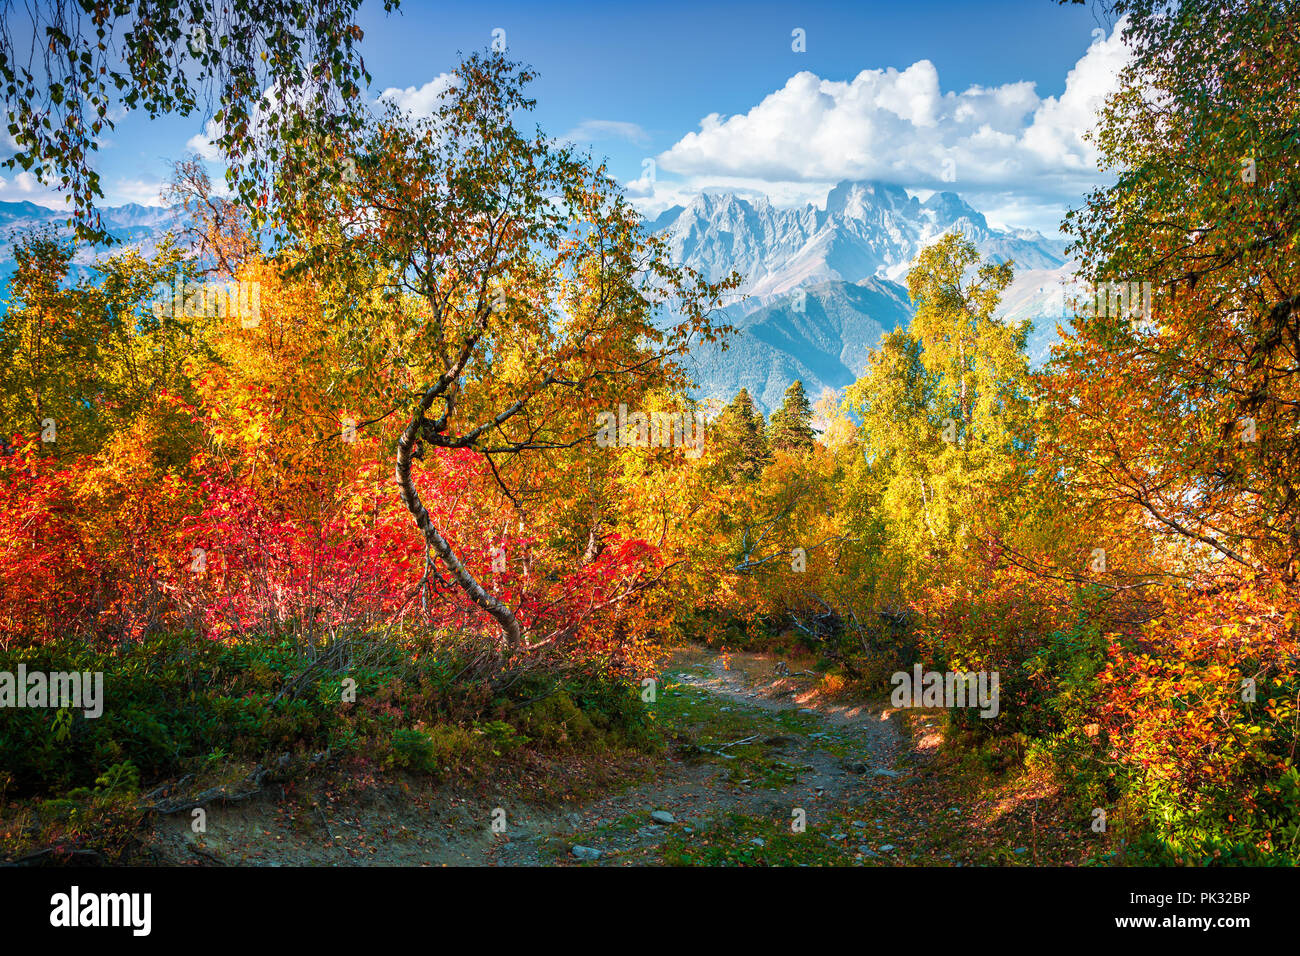 Colorful autumn morning in the Caucasus mountain forest. Upper Svaneti, Georgia, Europe. October 2015. Stock Photo